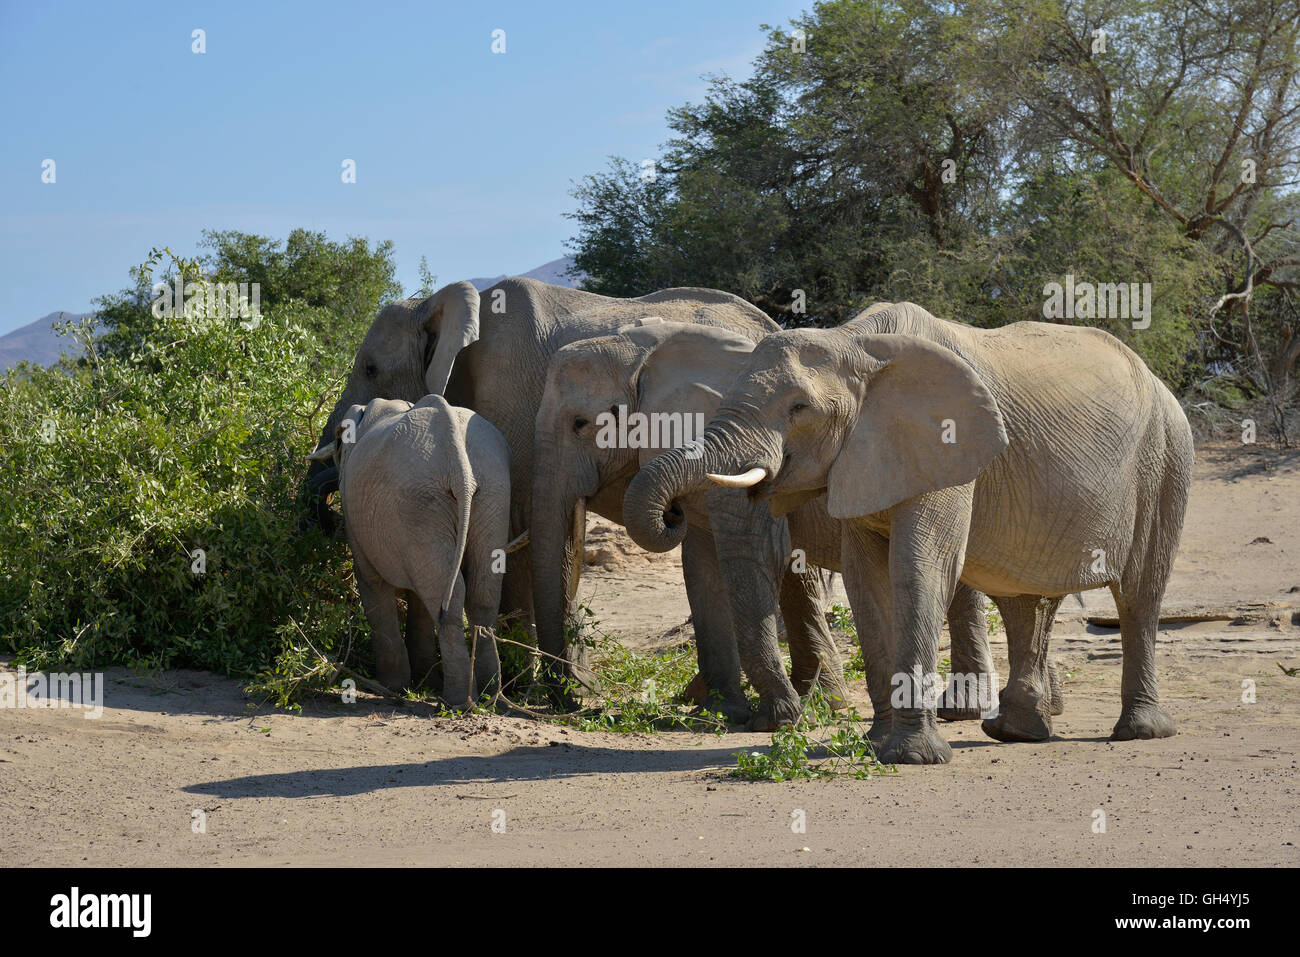 zoology / animals, mammal (mammalia), African savanna elephants (Loxodonta africana) in the dry riverbed of the Hoarusib, near Purros, Kaokoveld, Namibia, Africa, Additional-Rights-Clearance-Info-Not-Available Stock Photo